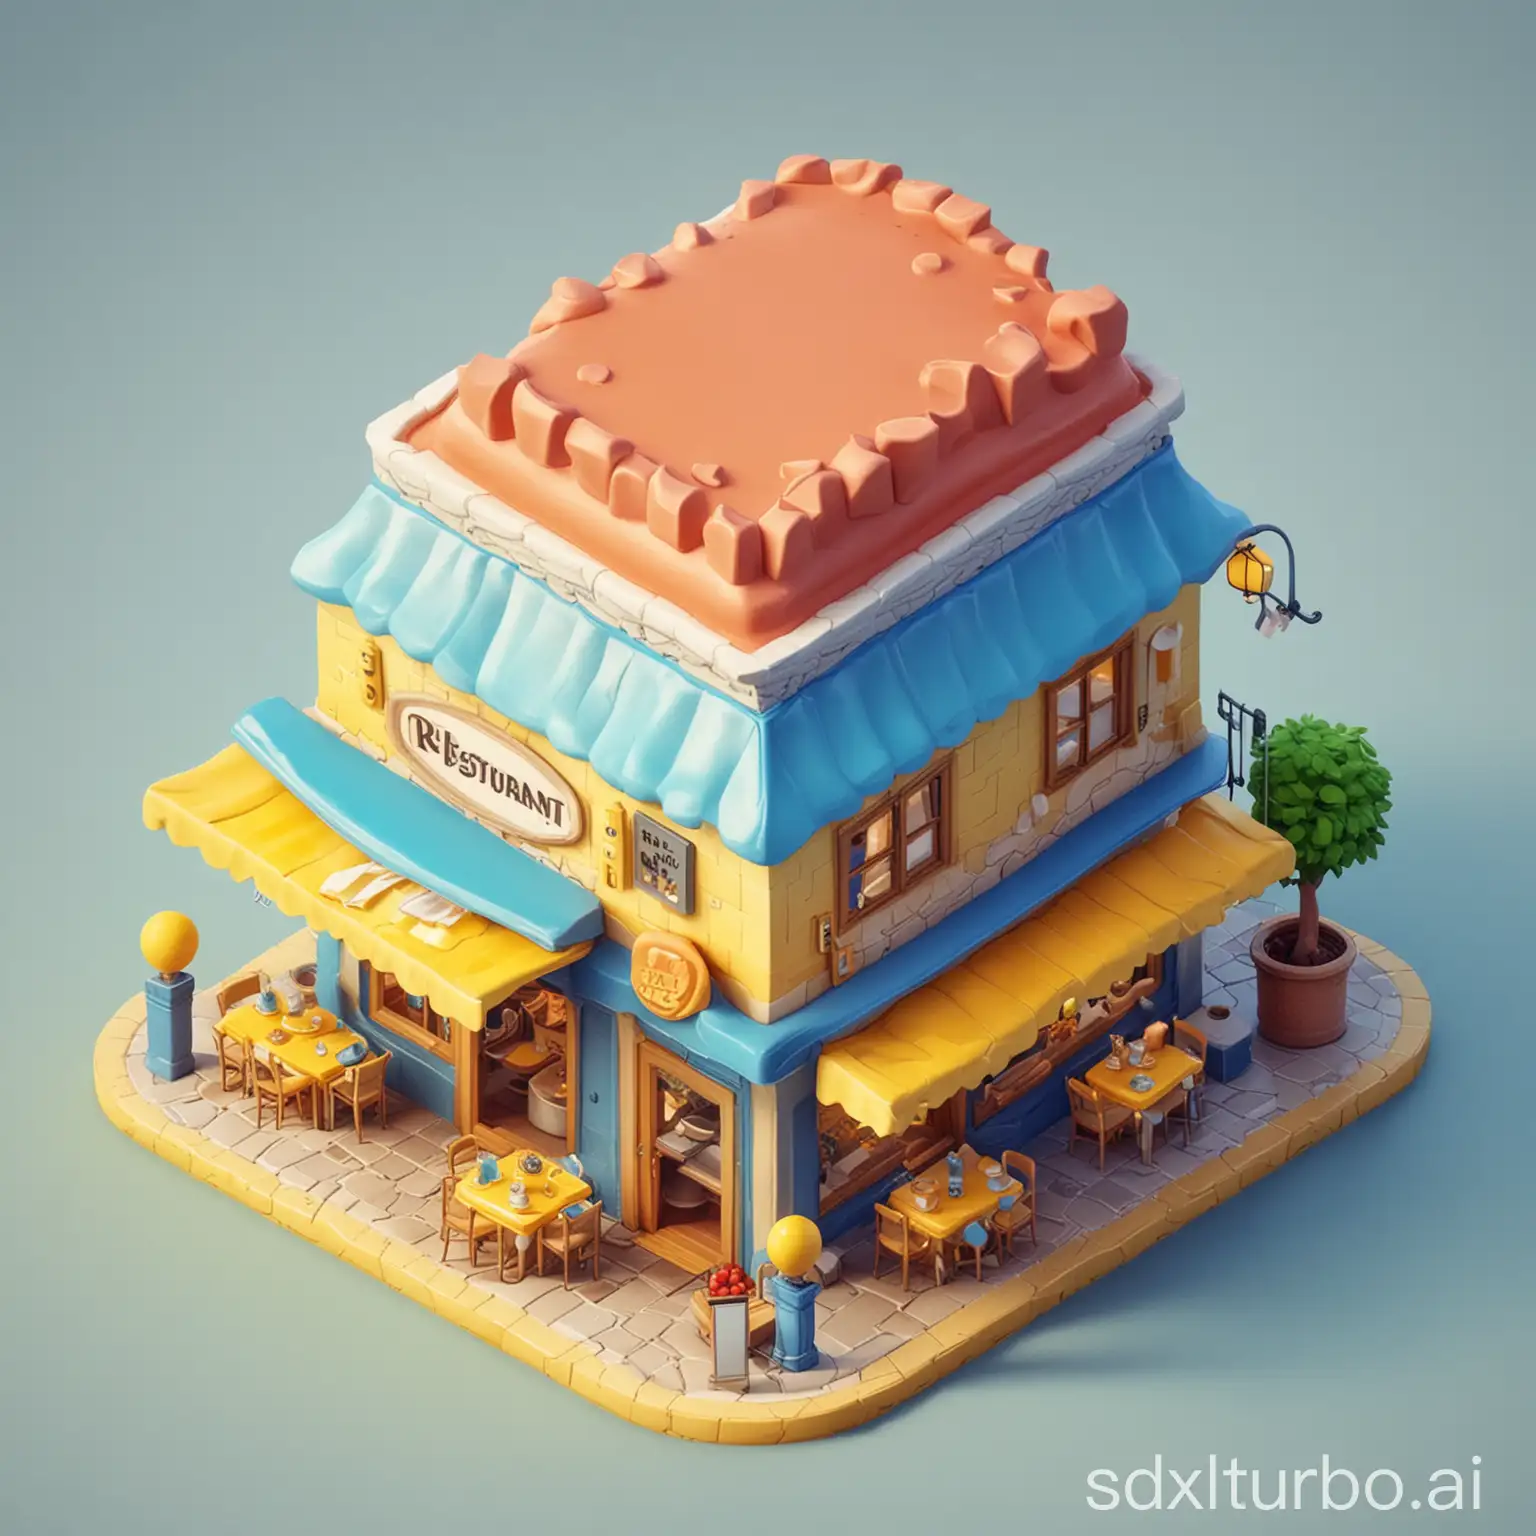 Cartoon-3D-Restaurant-Icon-in-Cute-Clay-Style-on-Blue-and-Yellow-Gradient-Background